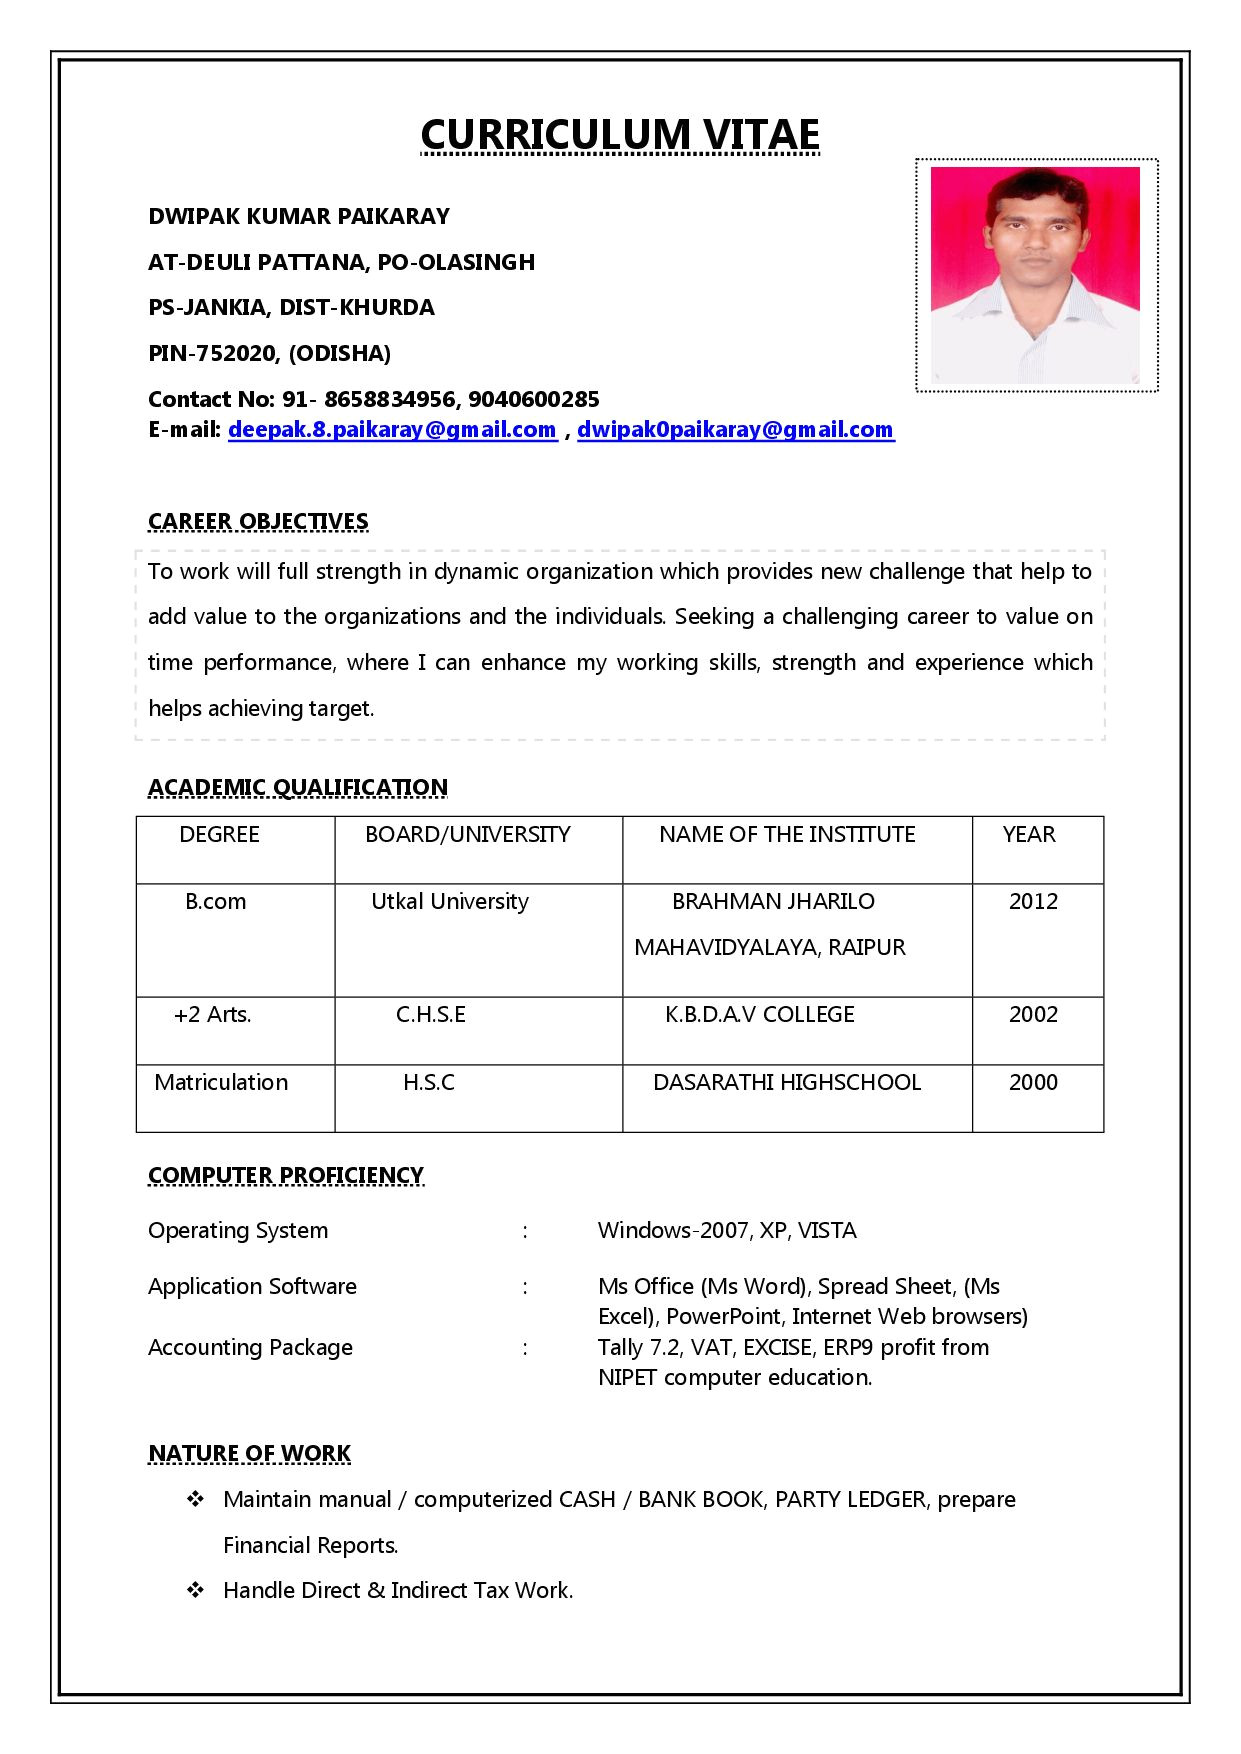 How to Create Resume for Job Interview Job Job Resume format New Resume format Job Resume